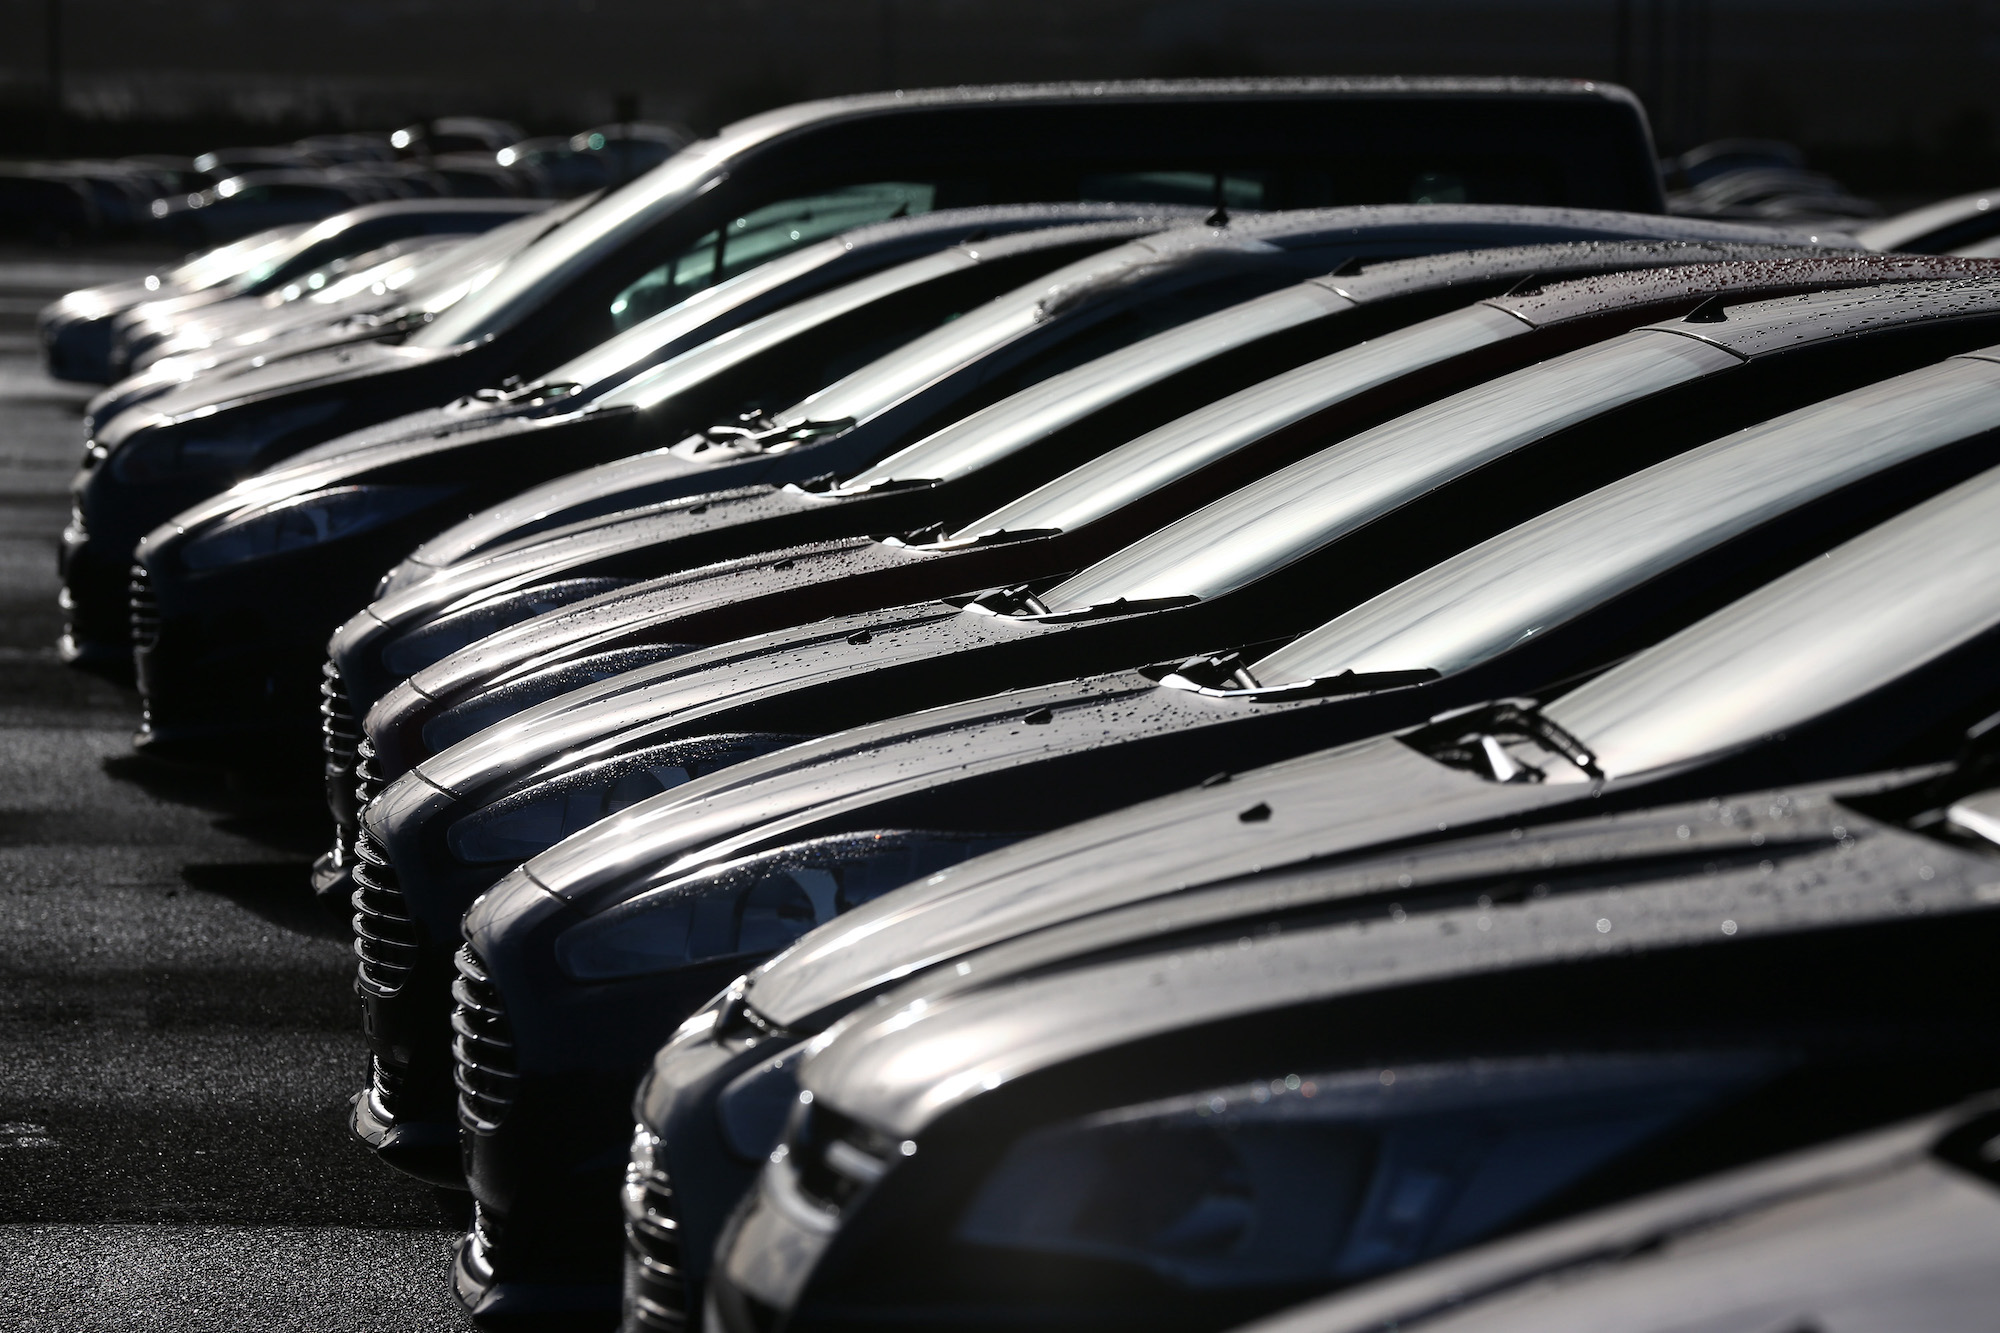 Vehicles lined up on a car lot